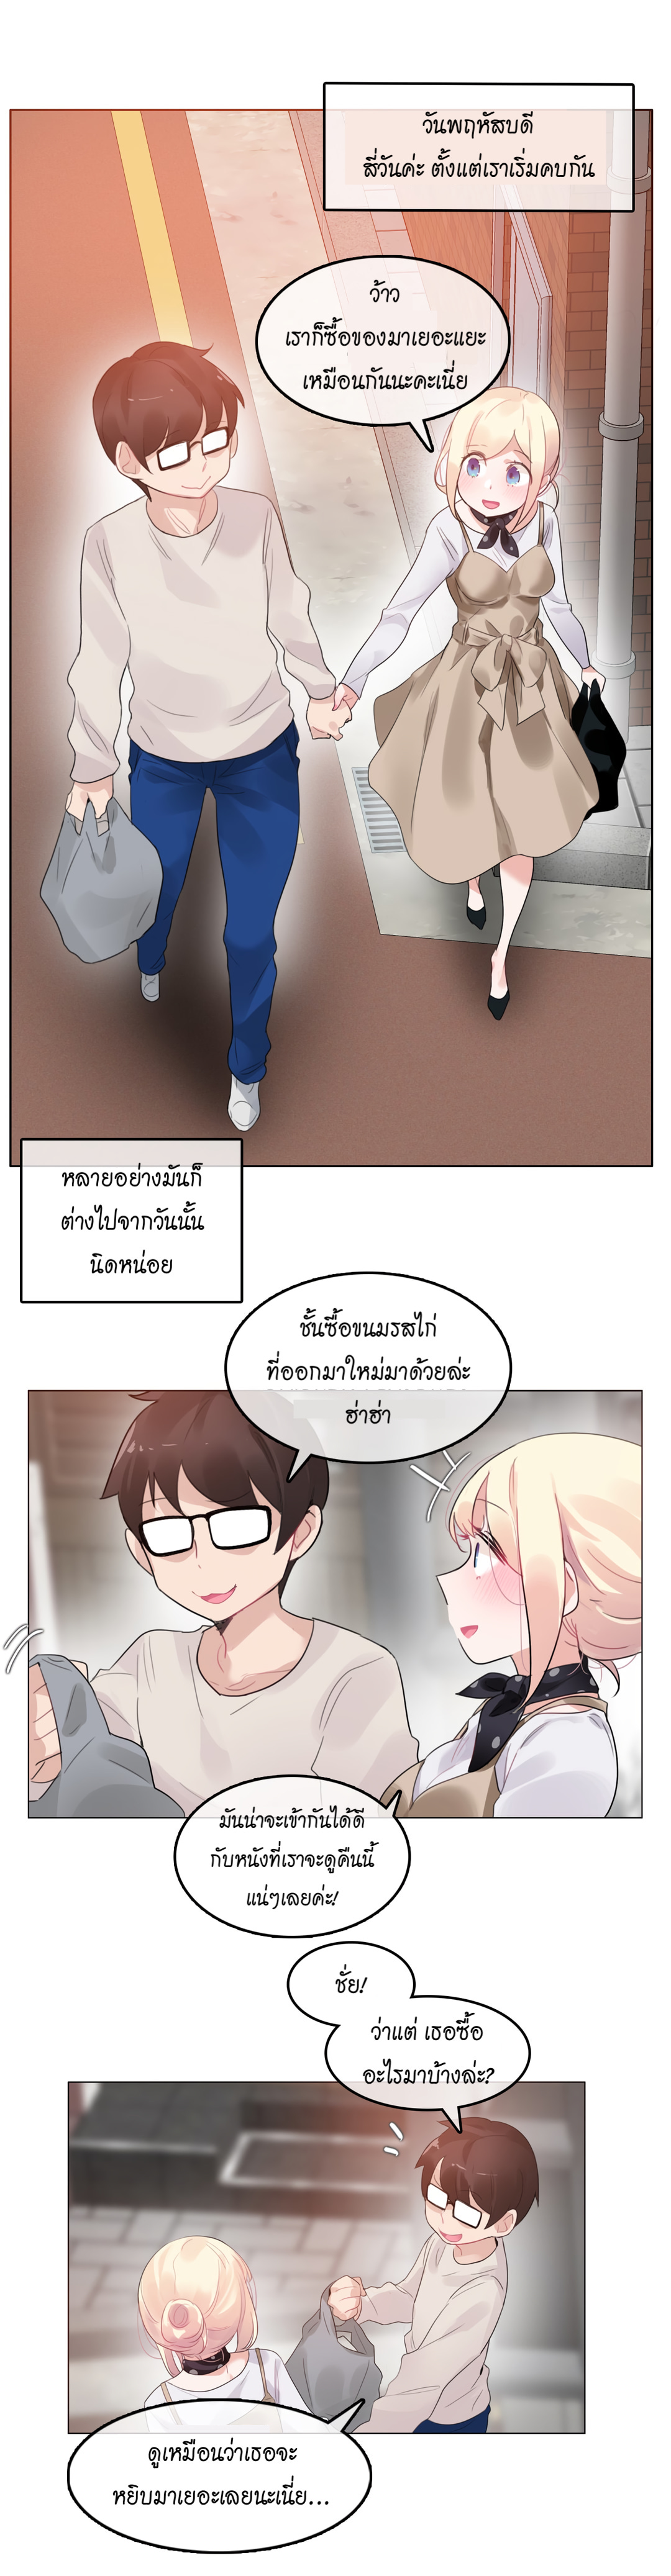 A Pervert’s Daily Life56 (12)